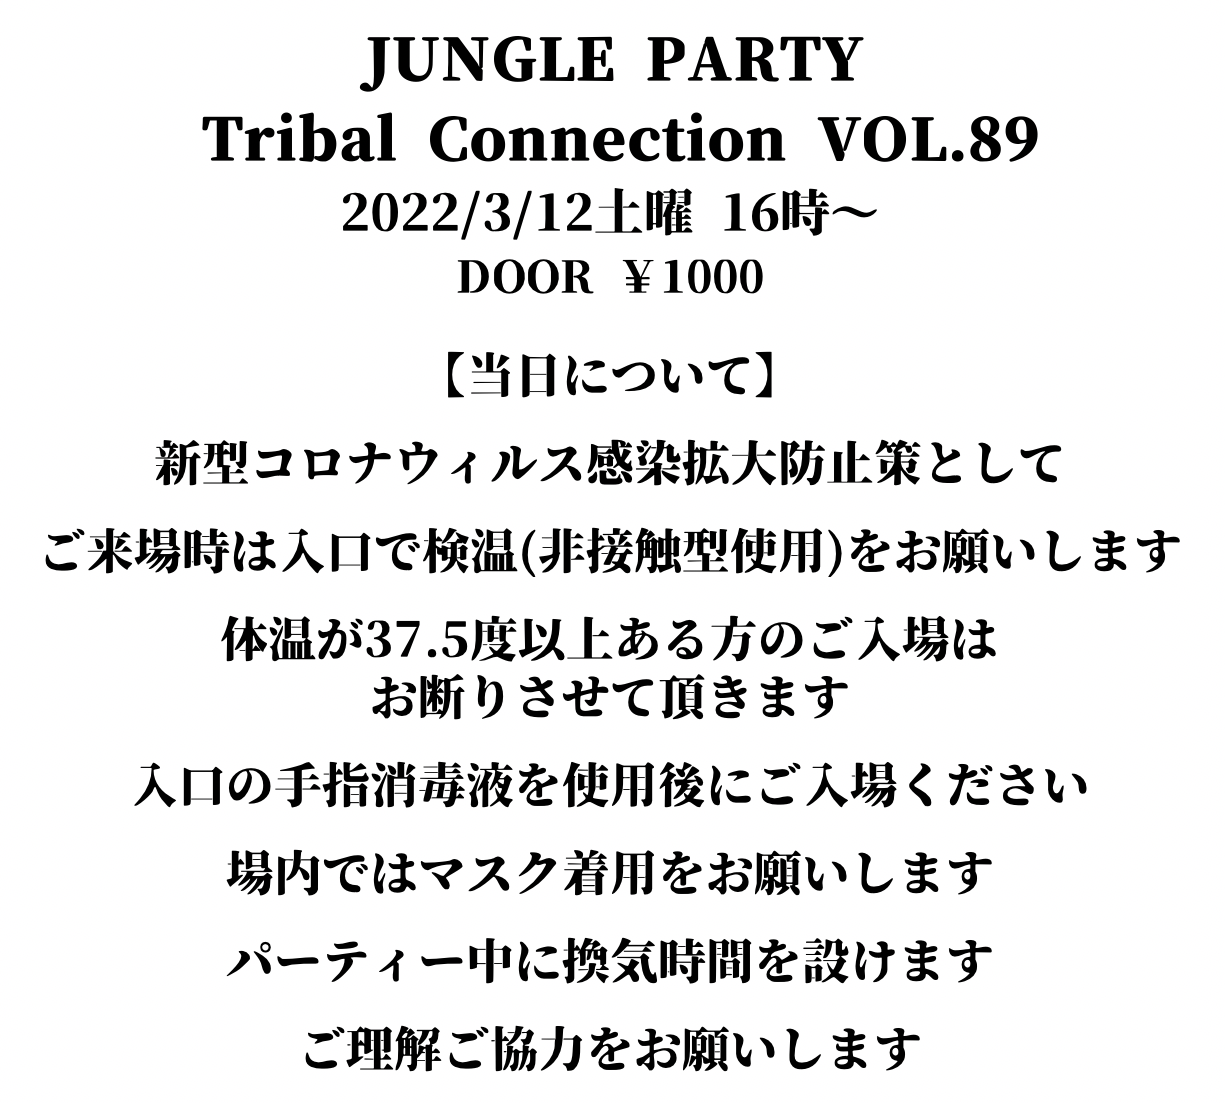 【Party Time Change: 5pm-11pm to 4pm〜】Jungle Party Tribal Connection Vol.89 - Flyer back